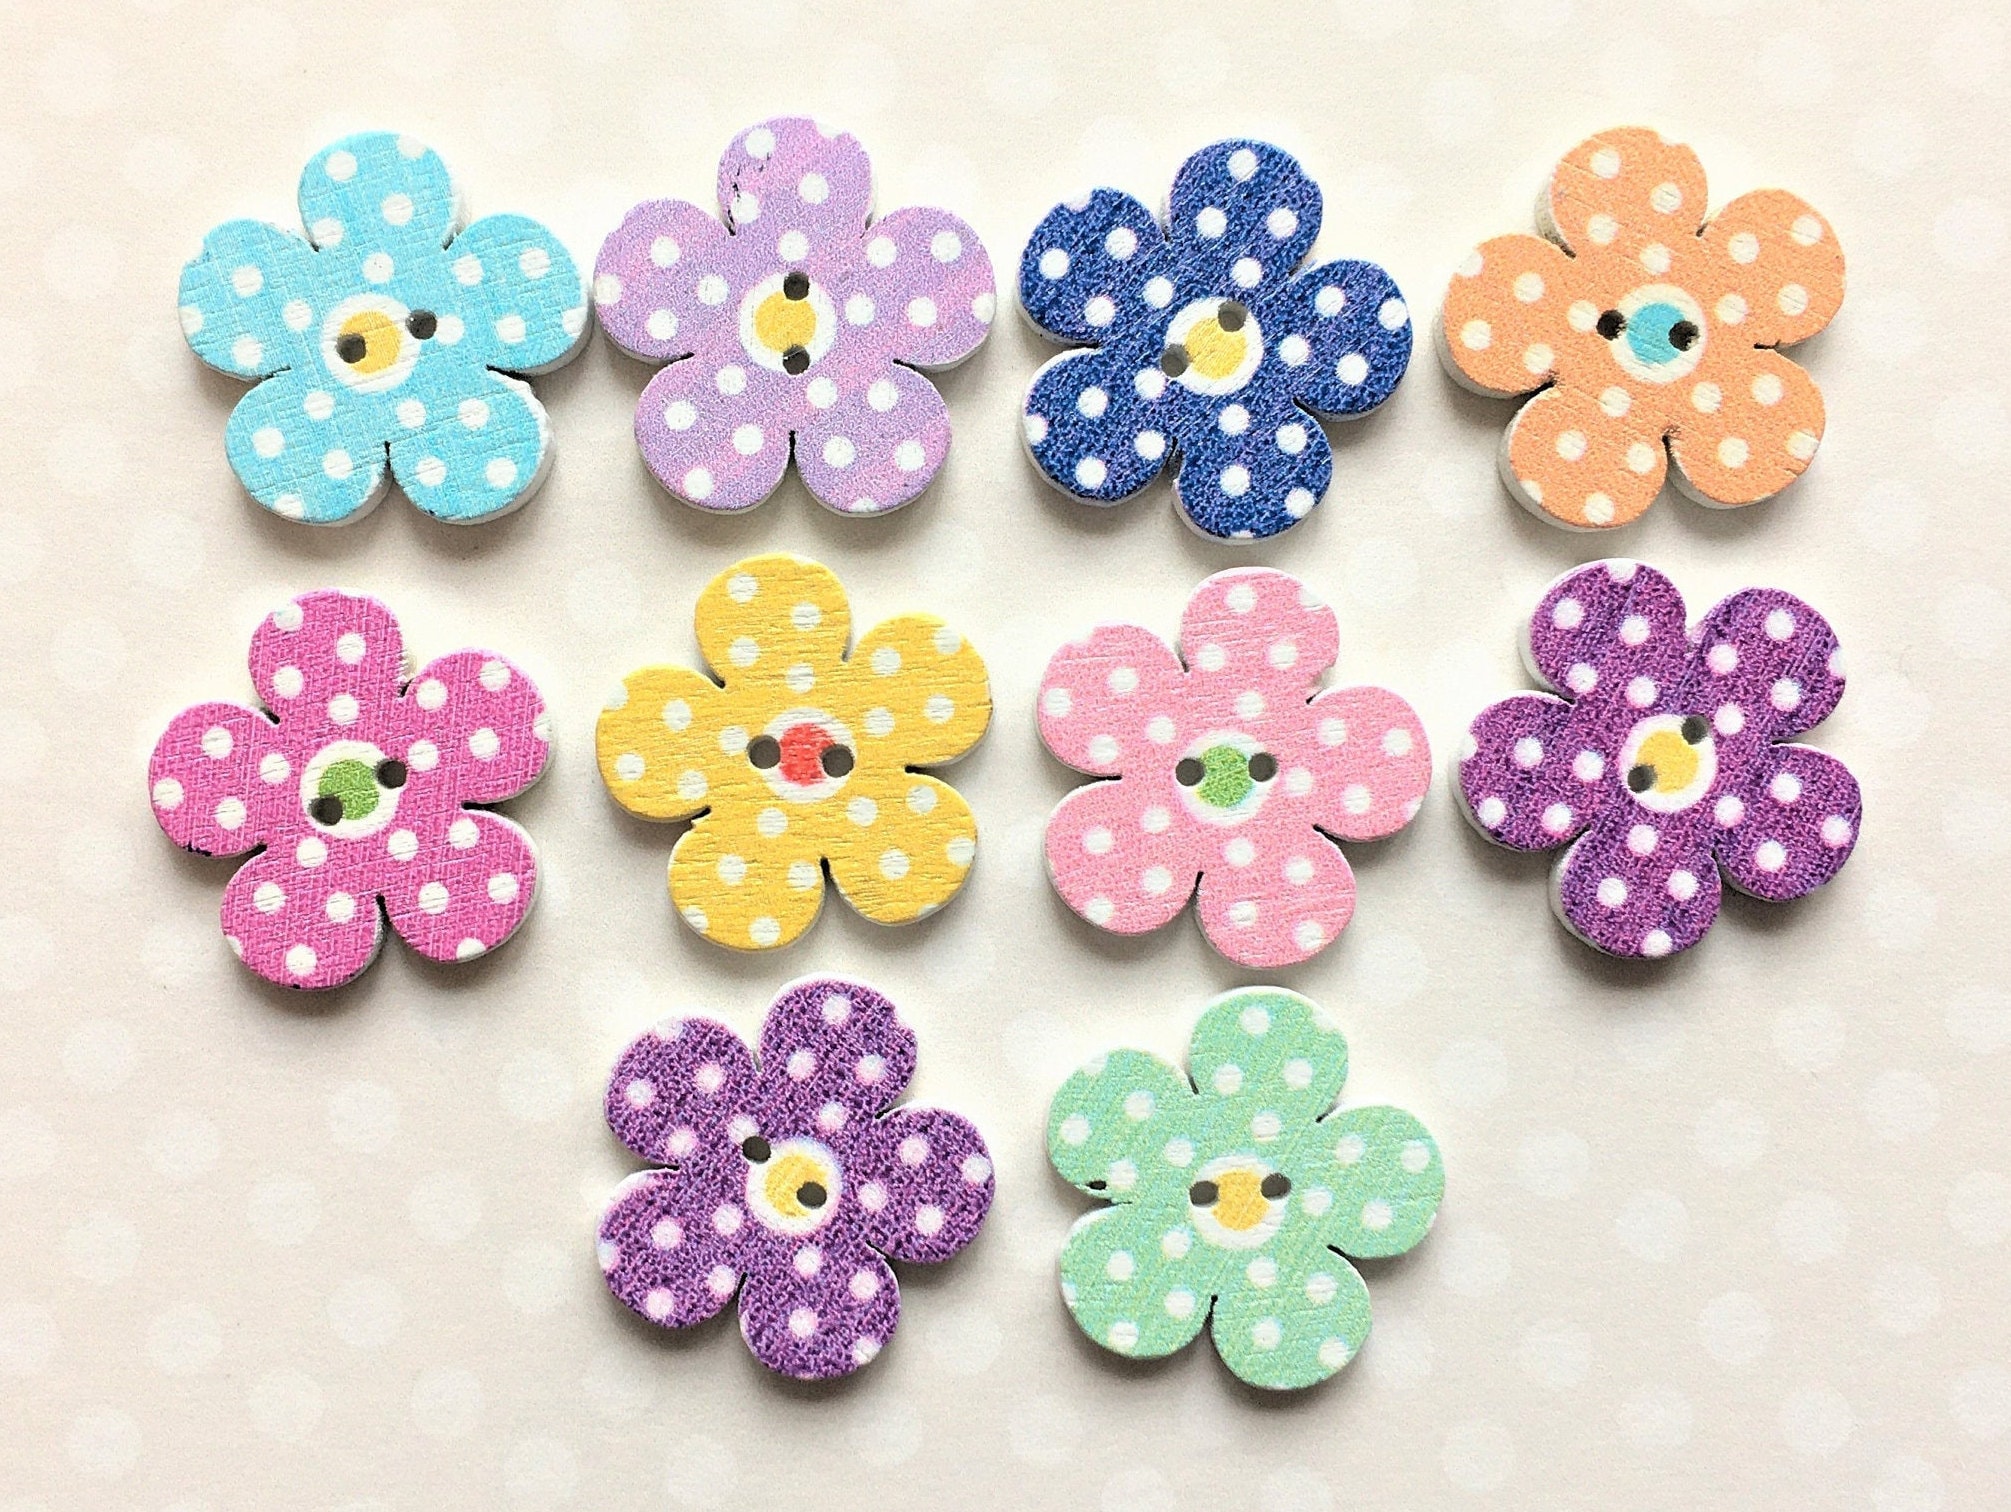 Giant Flower Buttons, Giant CREAM Flower Buttons 6.5cm, Extra Large Buttons,  Huge Novelty Button, Giant Children's Buttons, UK Buttons Shop 